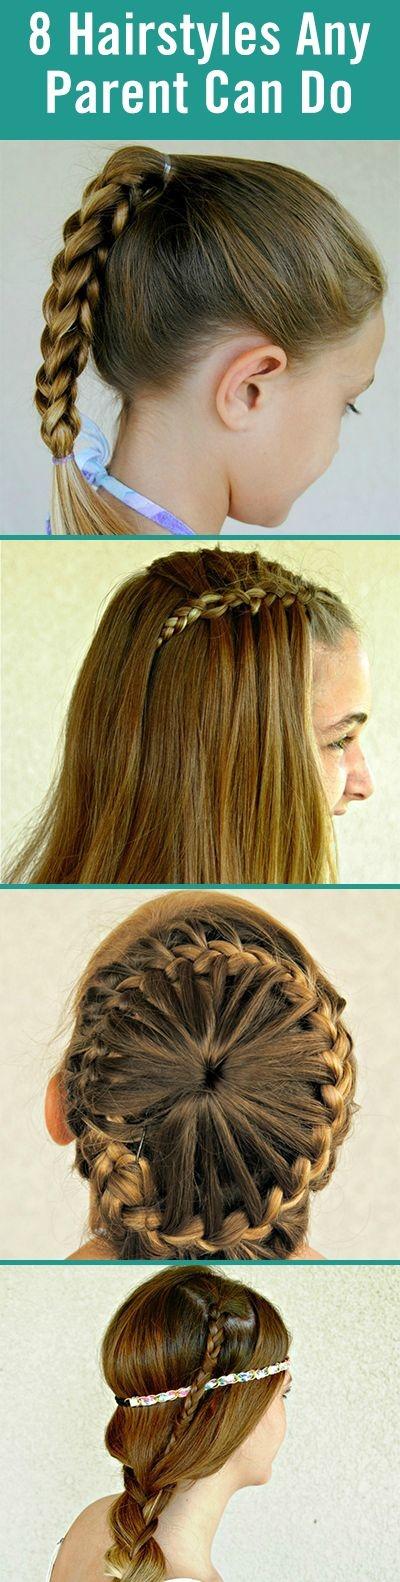 Hairstyles kids can do themselves hairstyles-kids-can-do-themselves-04_12